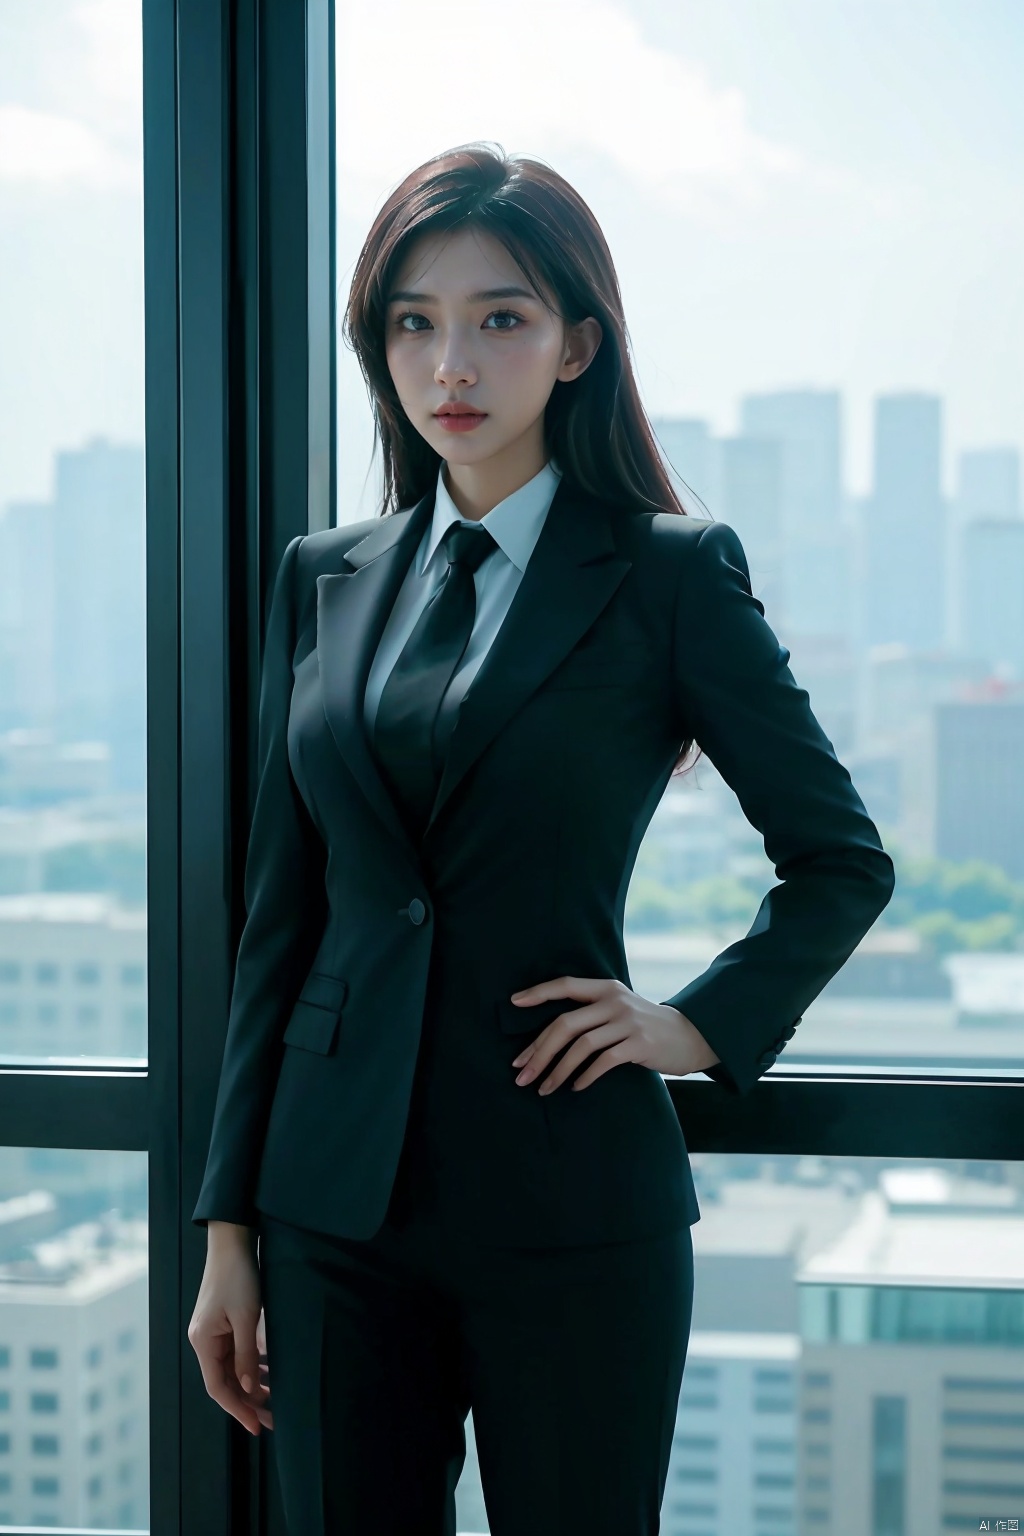 Modern businesswoman, dressed in a sleek suit and tie, posing confidently in a modern office setting, cityscape view through the window, focused expression, powerful pose, professional attire, realistic lighting, sharp focus.